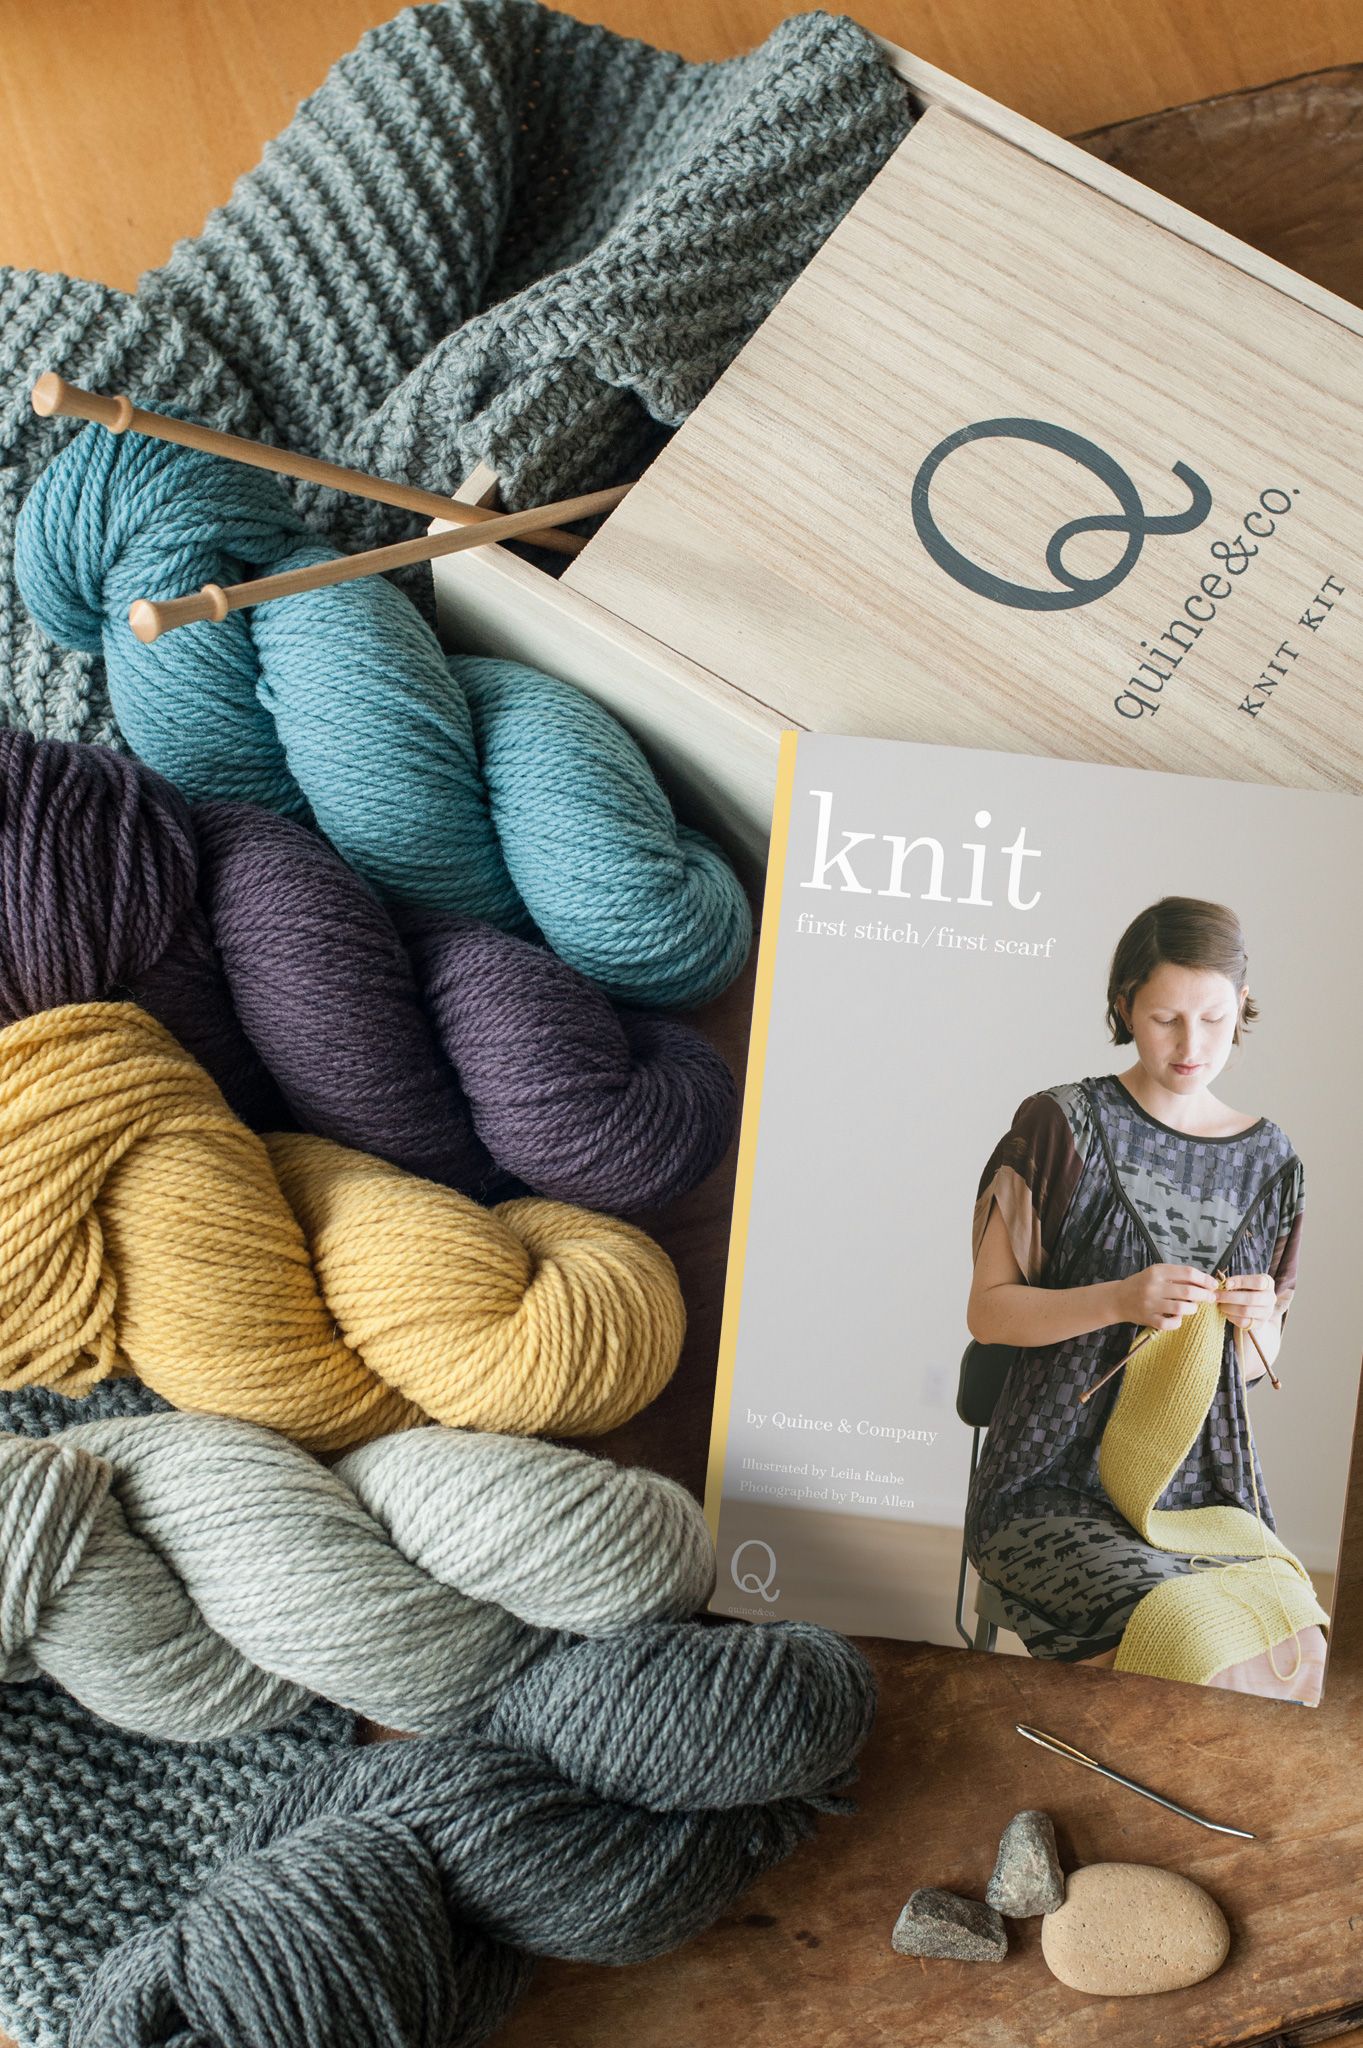 gather here classes - Knitting First Scarf Kit Support - - gatherhereonline.com